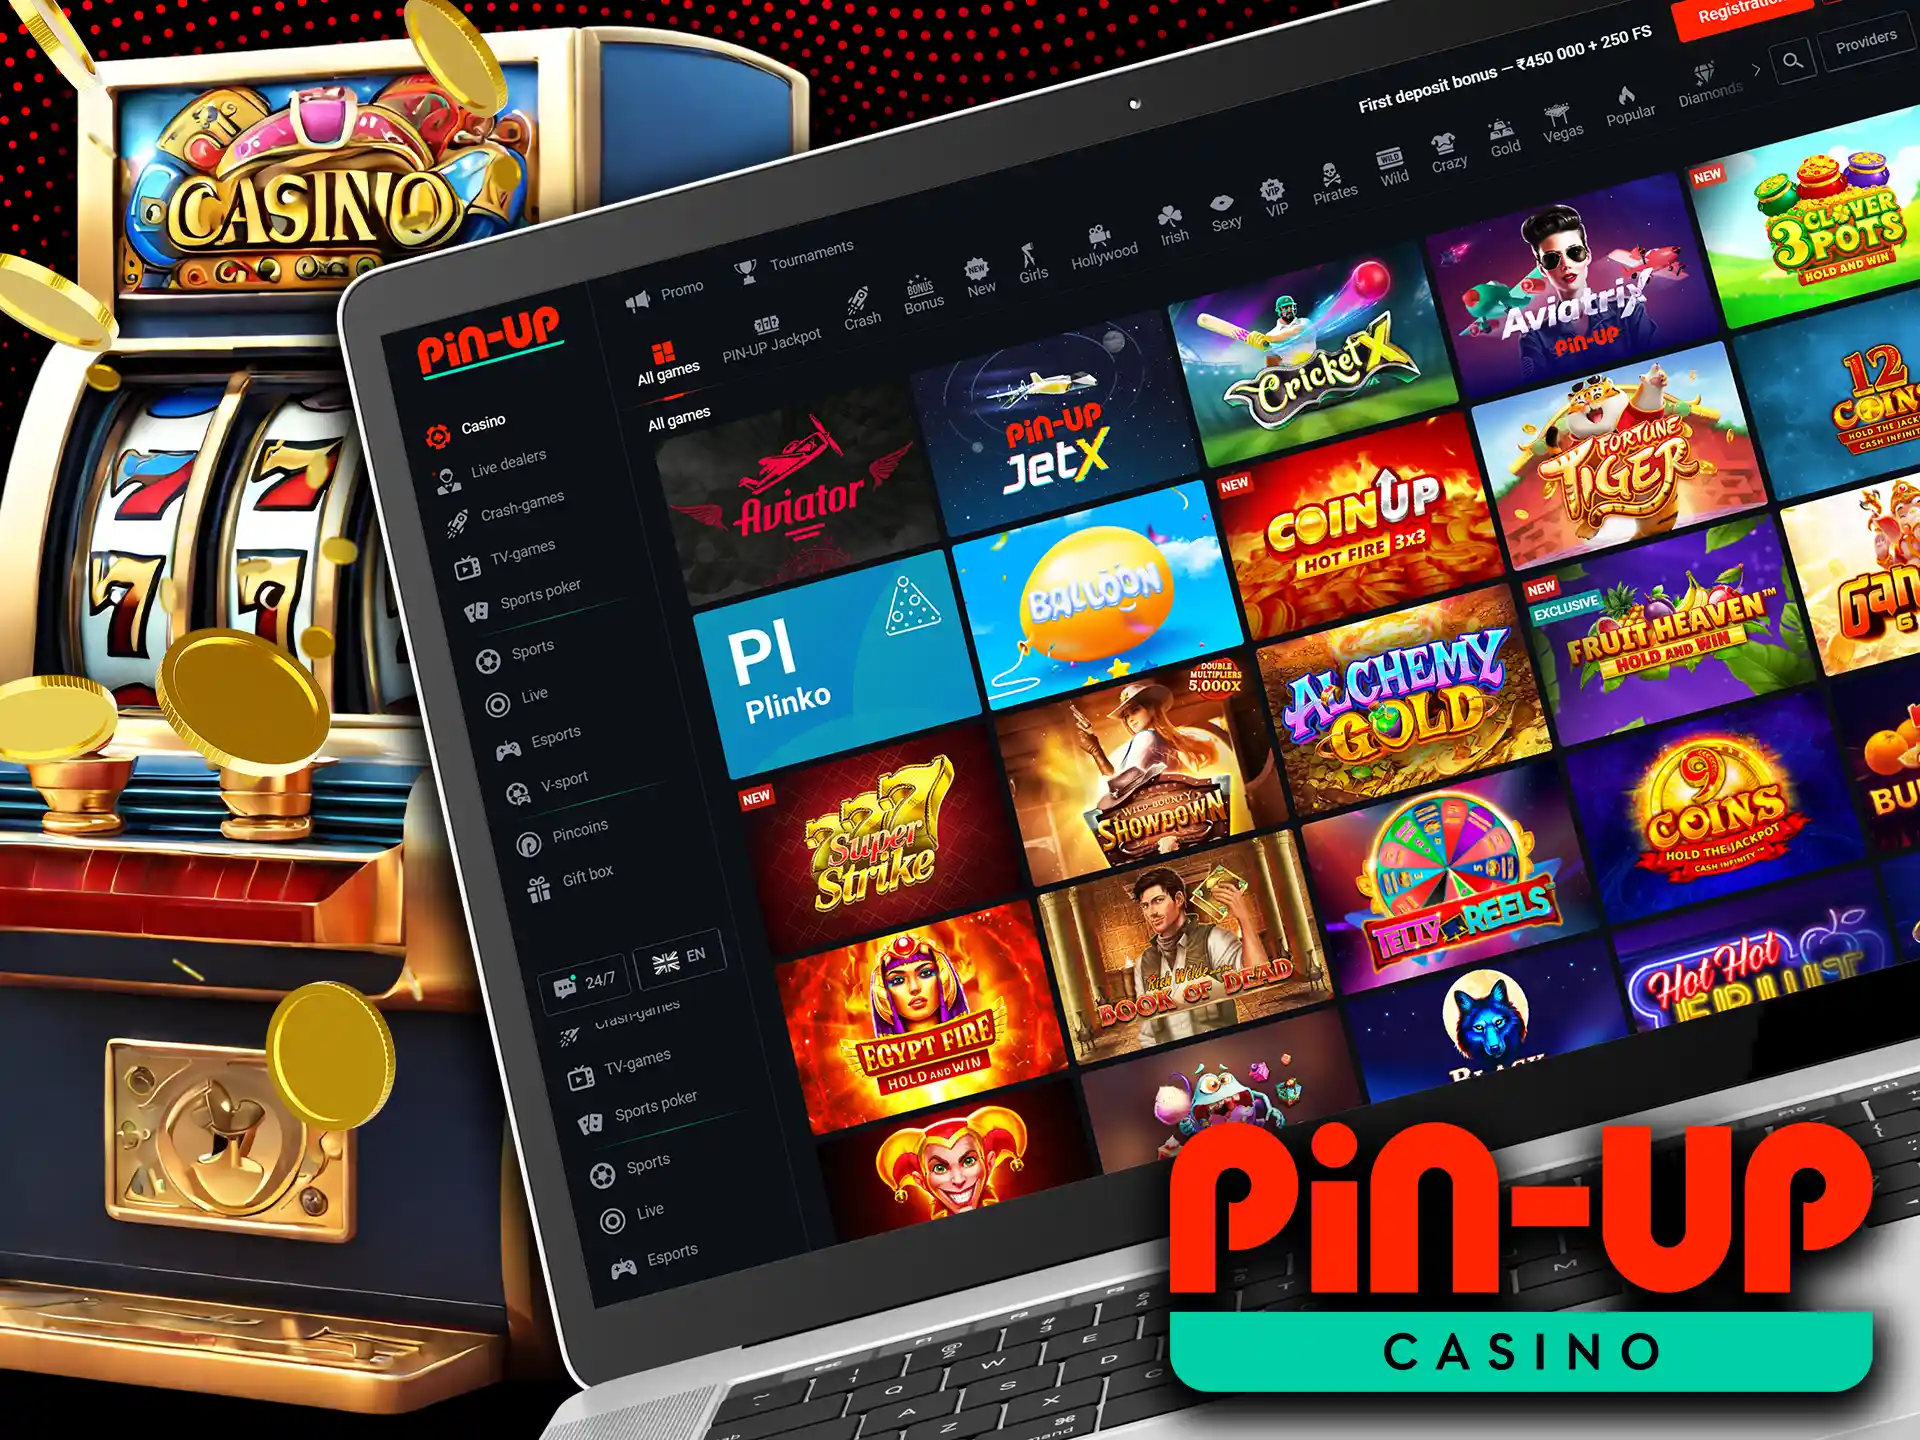 At the Pin-Up Casino, you can find lots of slots and table games available to play online.